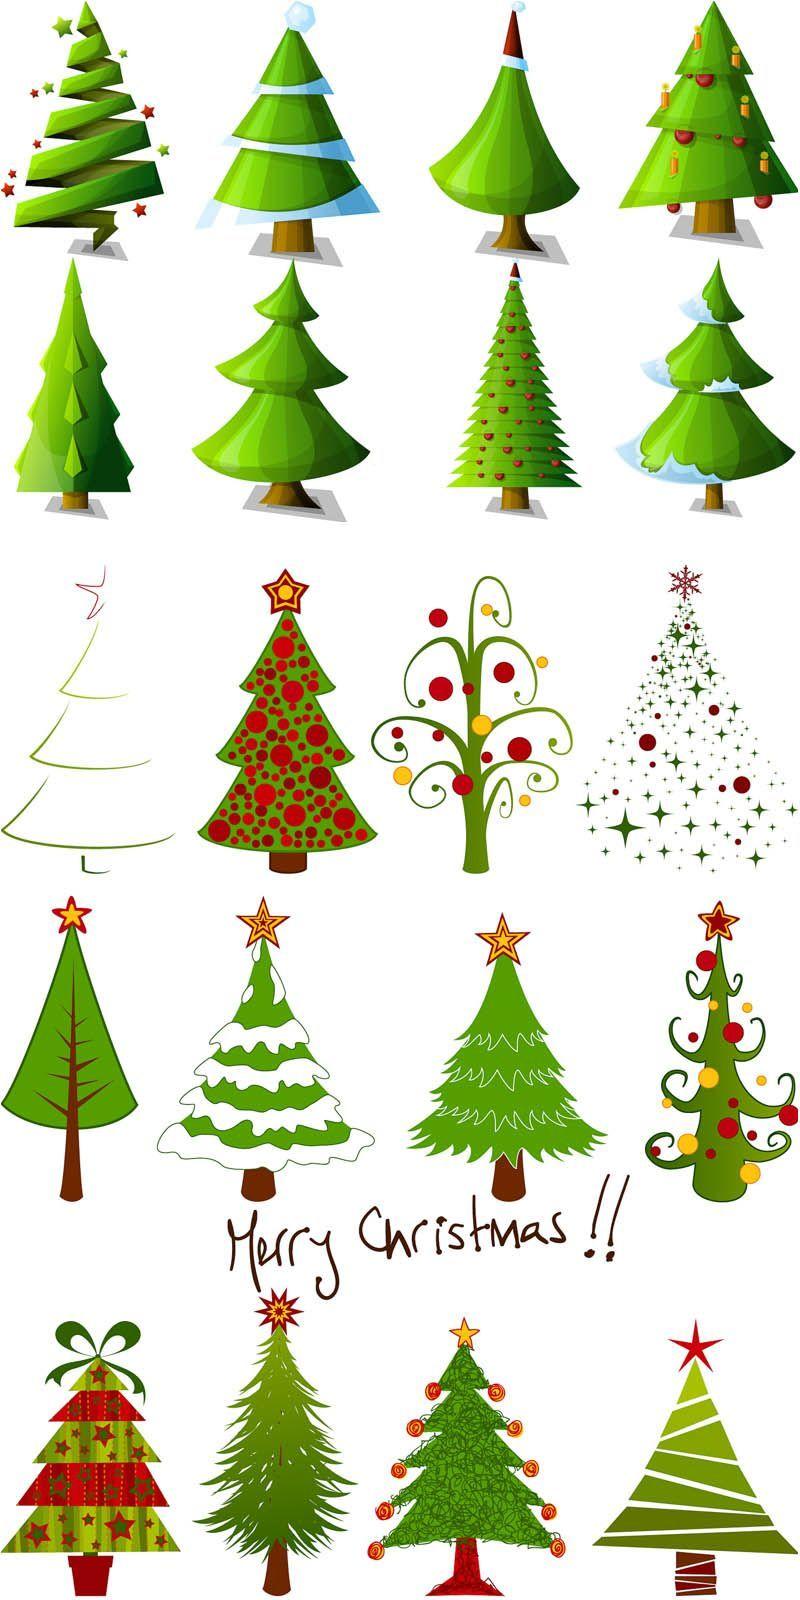 Christmas Tree Logo - 2 Sets of 20 vector cartoon Christmas tree designs in different ...